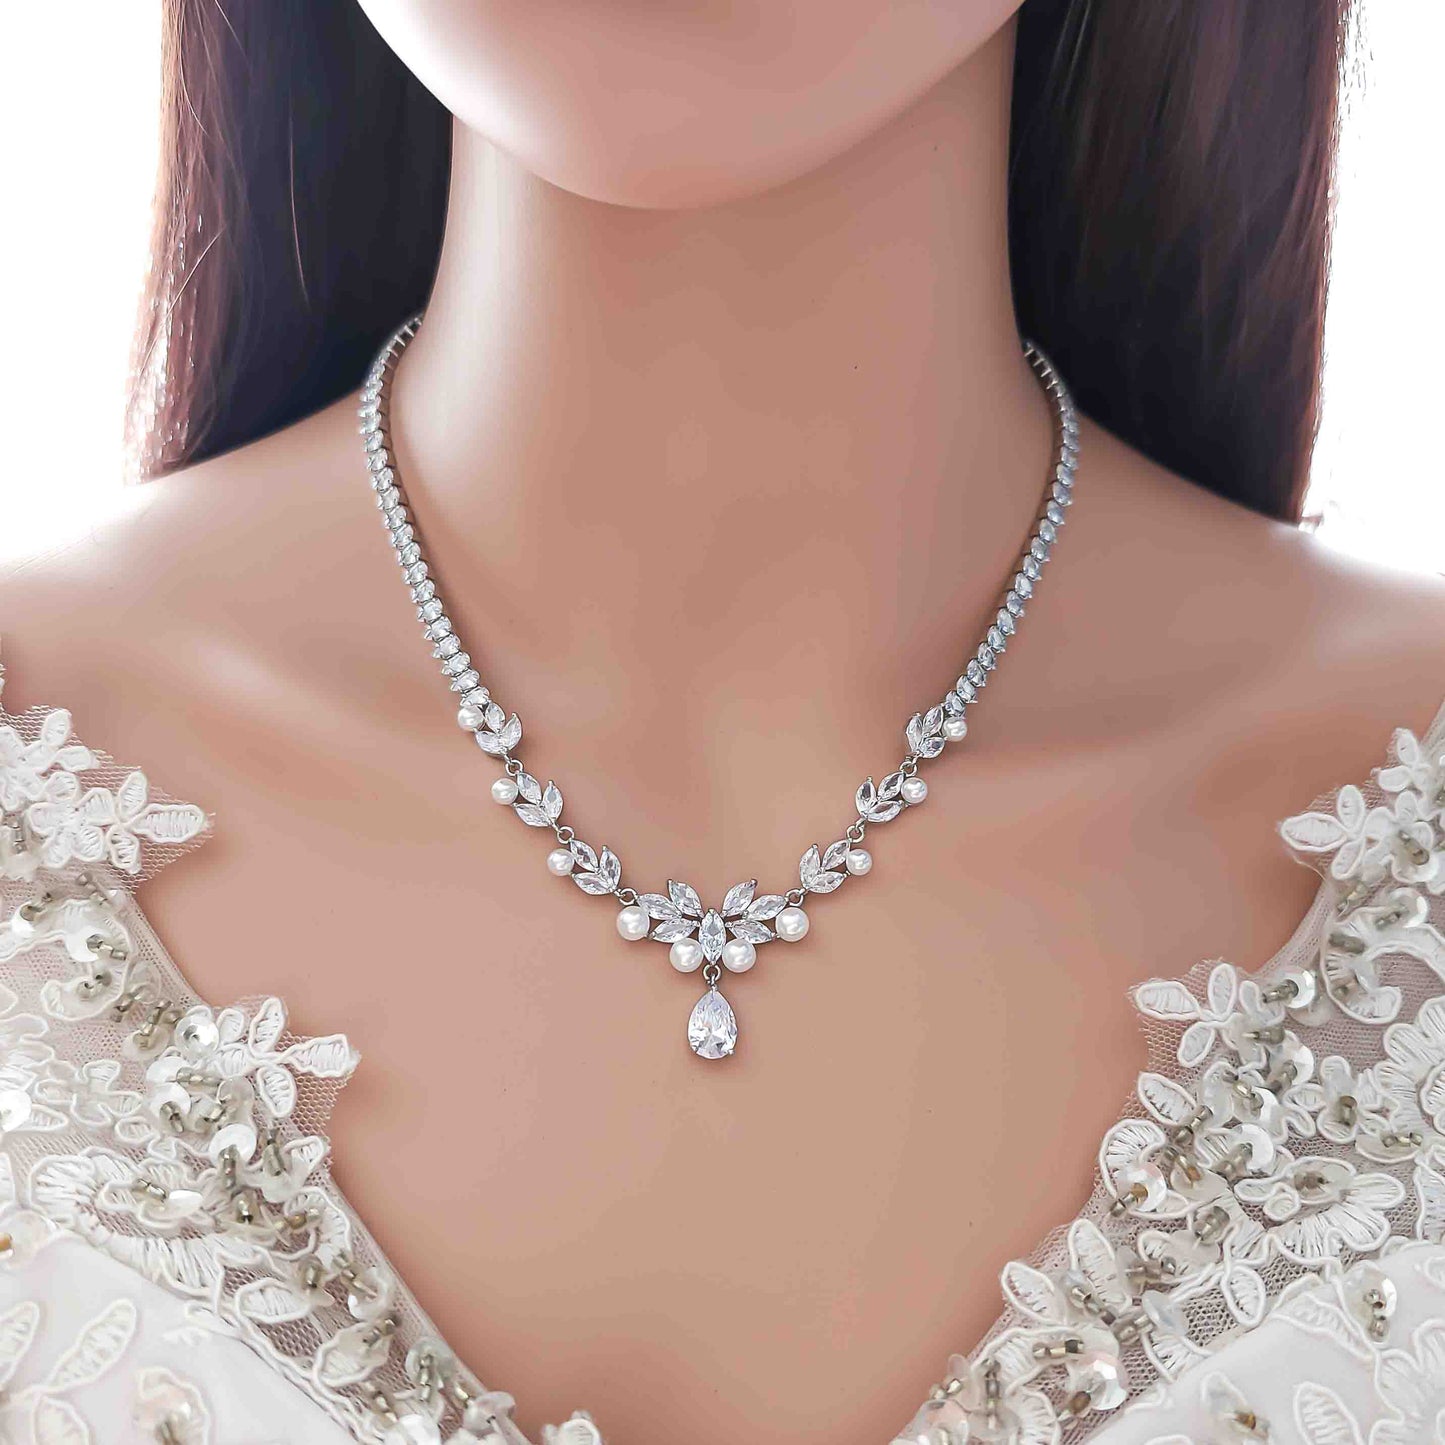 Bridal Pearl Necklace Set in Gold-Jenna